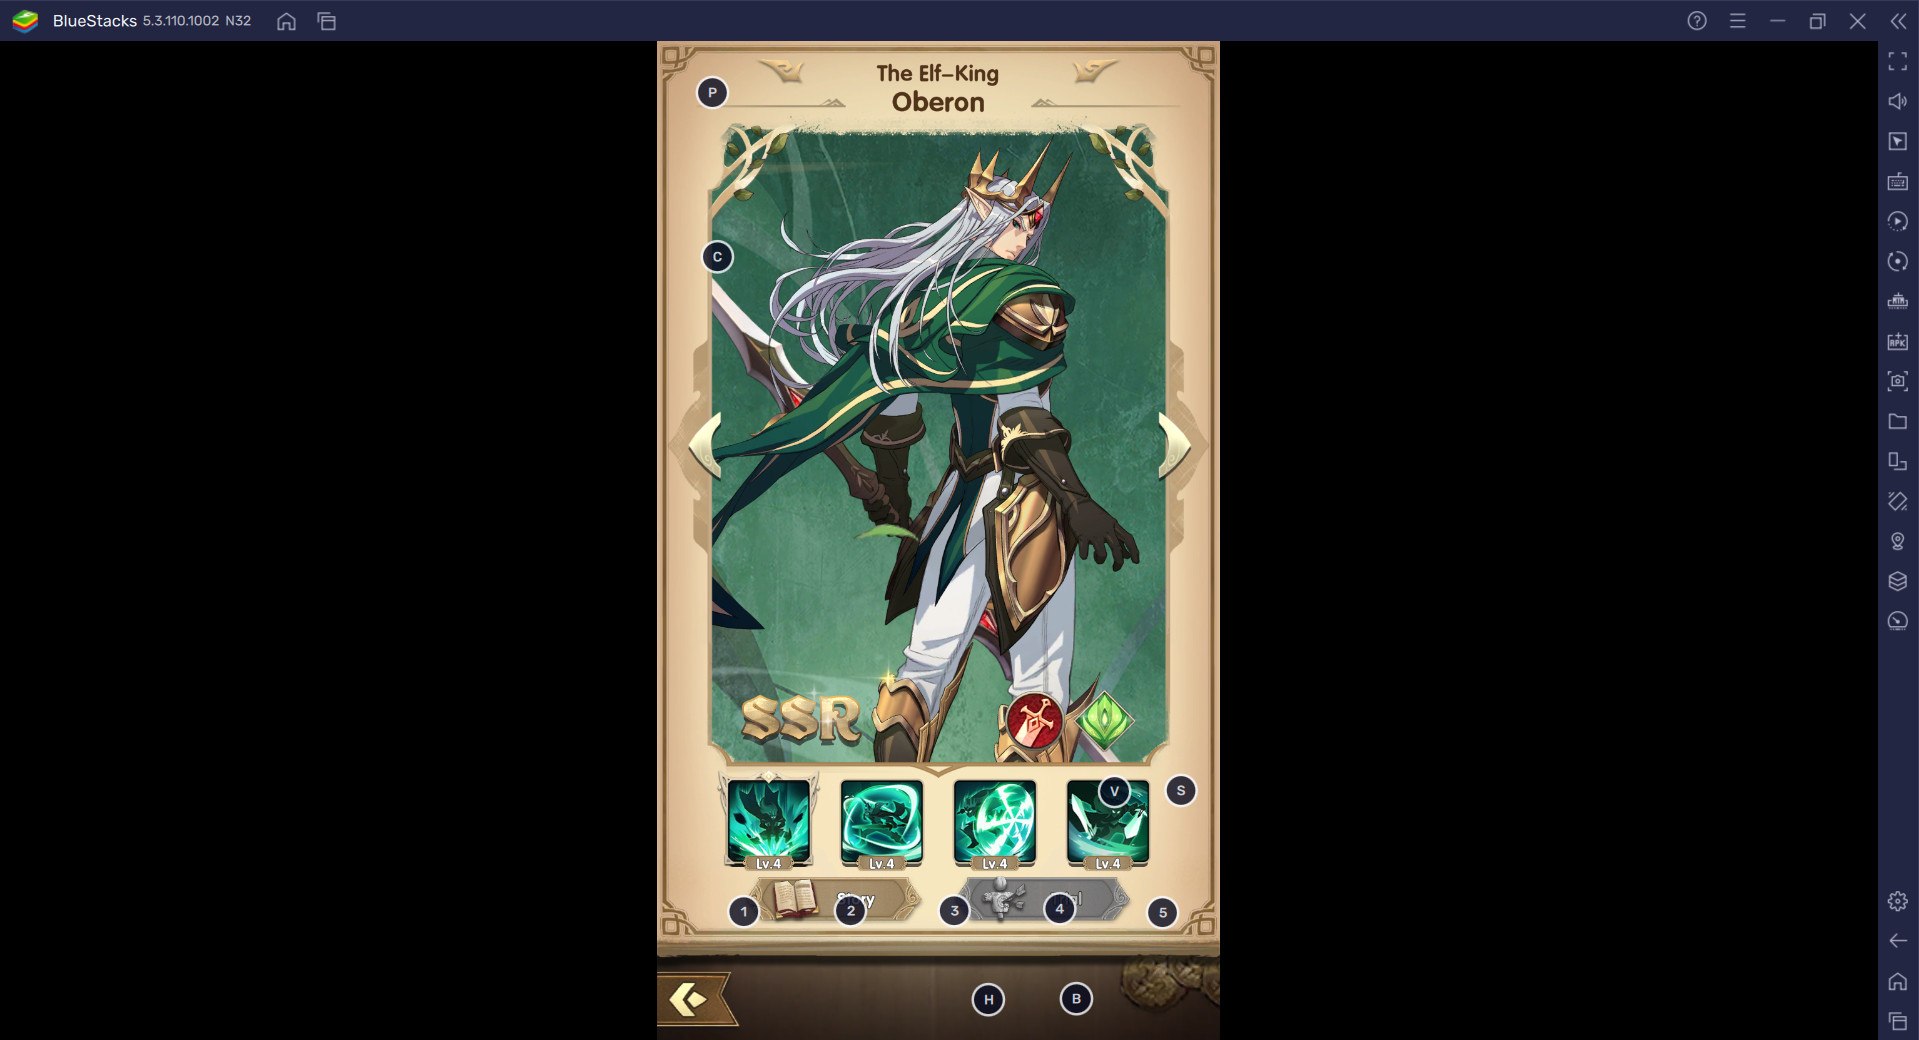 Mythic Heroes: Idle RPG มีอะไรเปลื่ยนแปลงบ้าง ใน PATCH NOTES V1.5.0